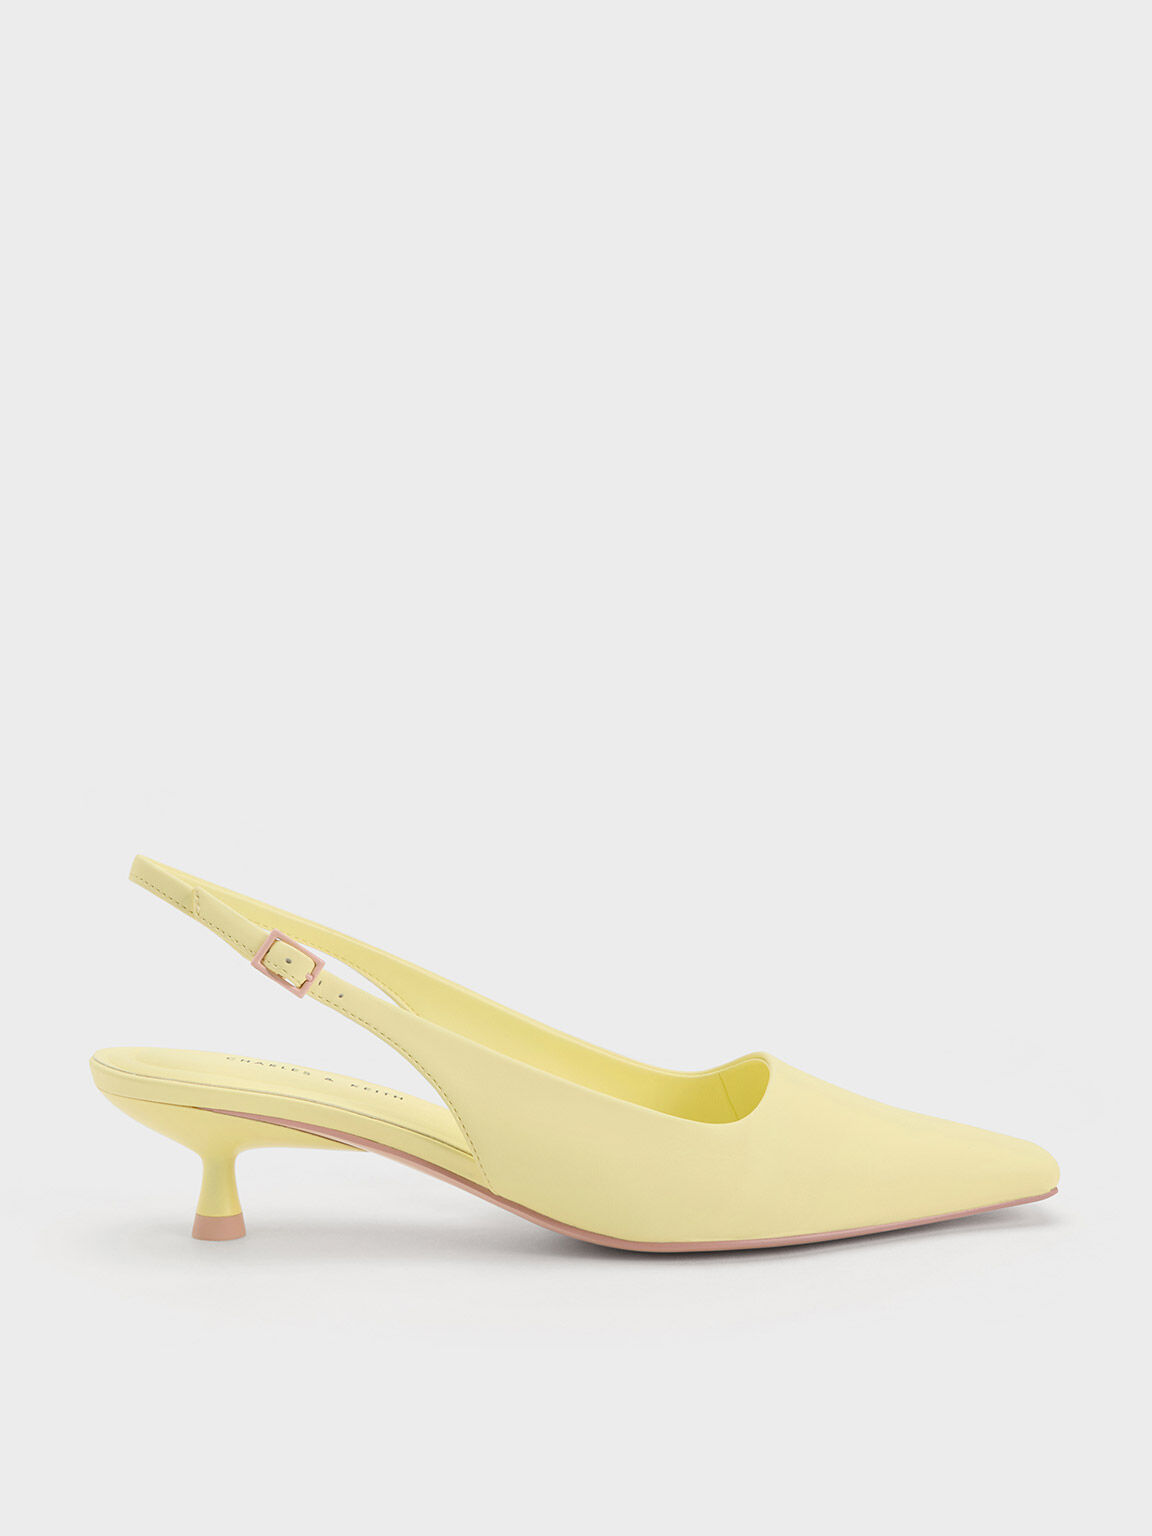 Charles & Keith Sling Back Statement Heeled Shoes in White | Lyst